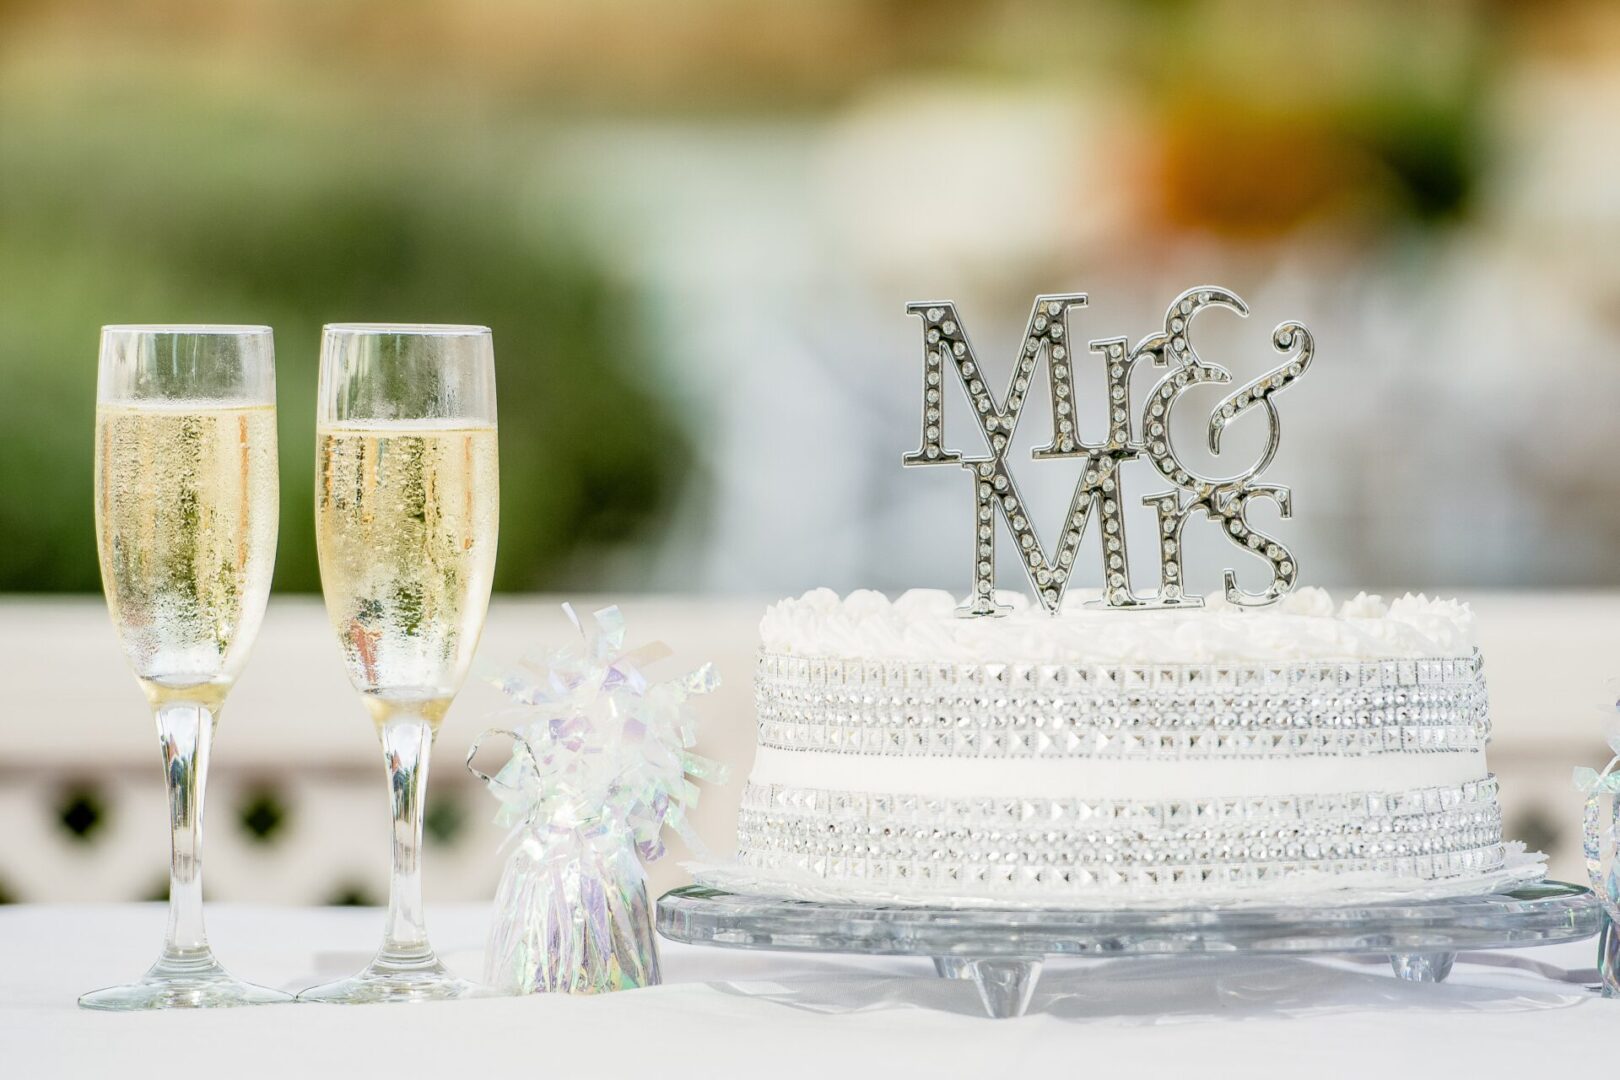 a Mr. and Mrs. Cake with two glasses of Champagne